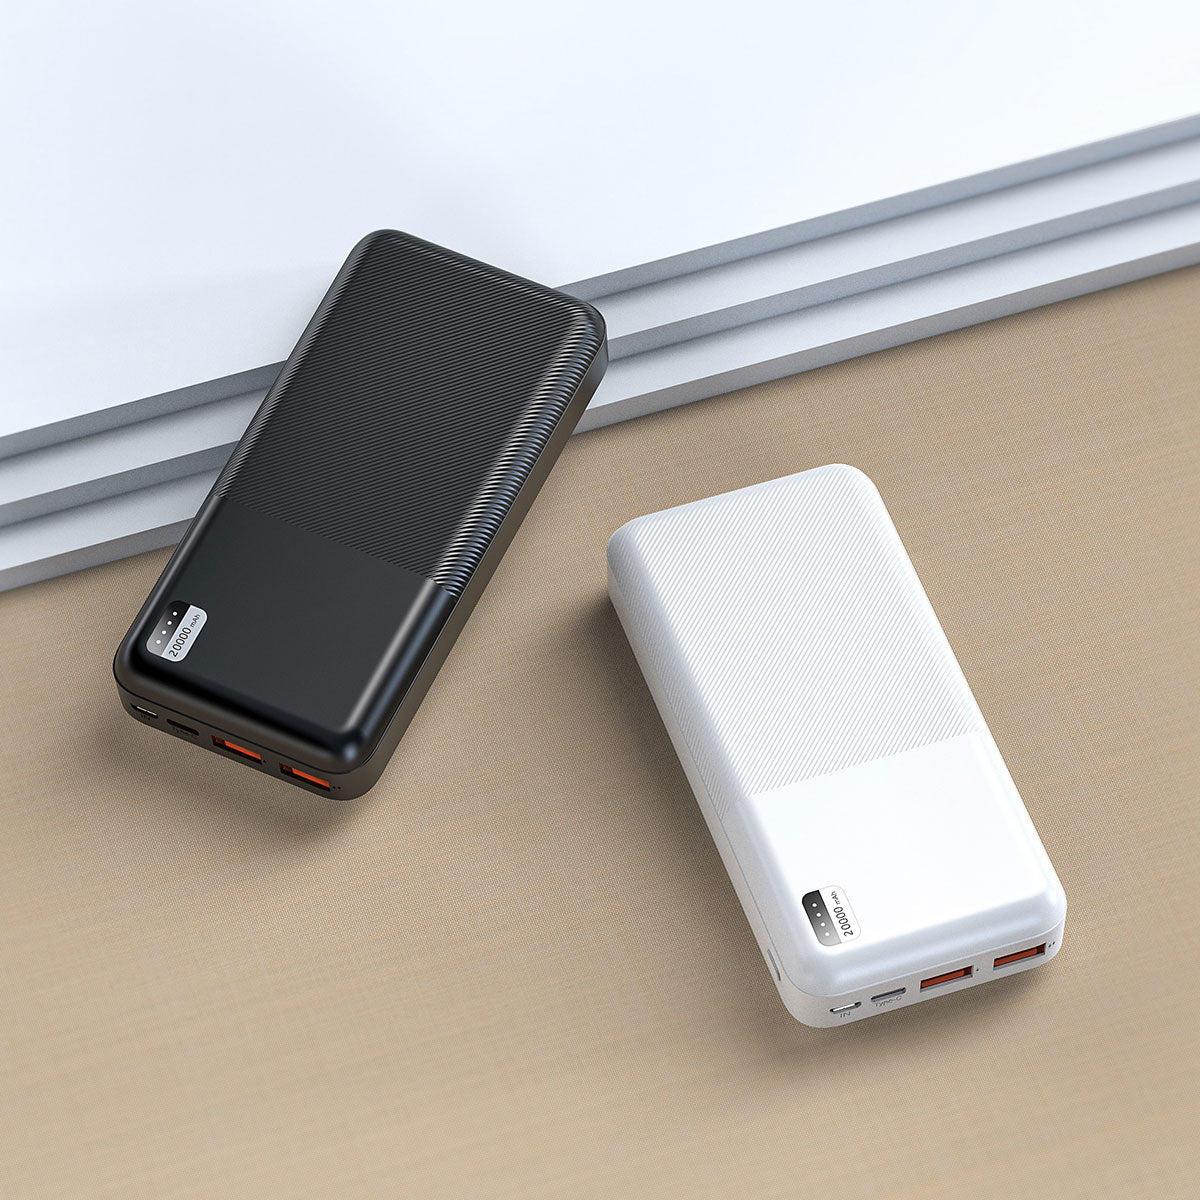 Xipin PX722 Dual USB Portable Powerbank 20000mAh with Quick Charge LED Light Indicator